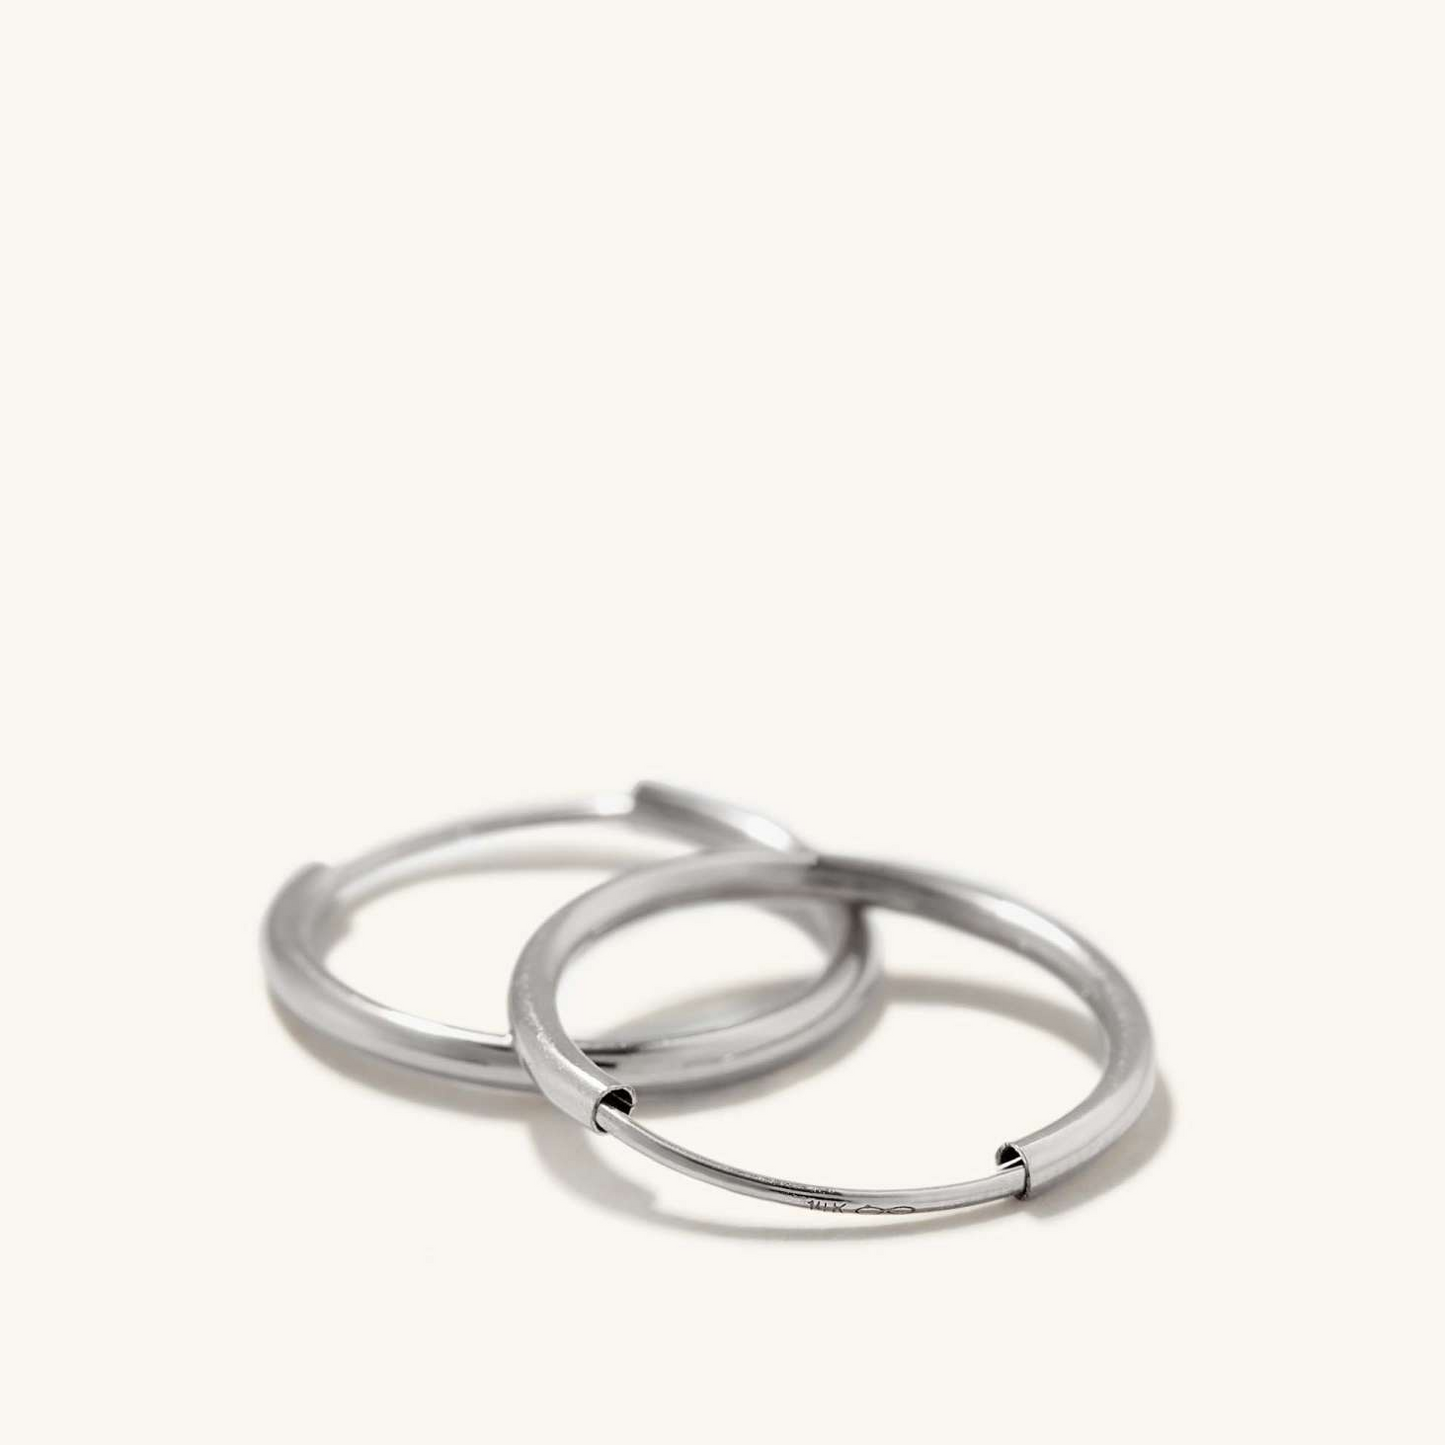 Small Hoops 18K Solid White Gold Round Earrings